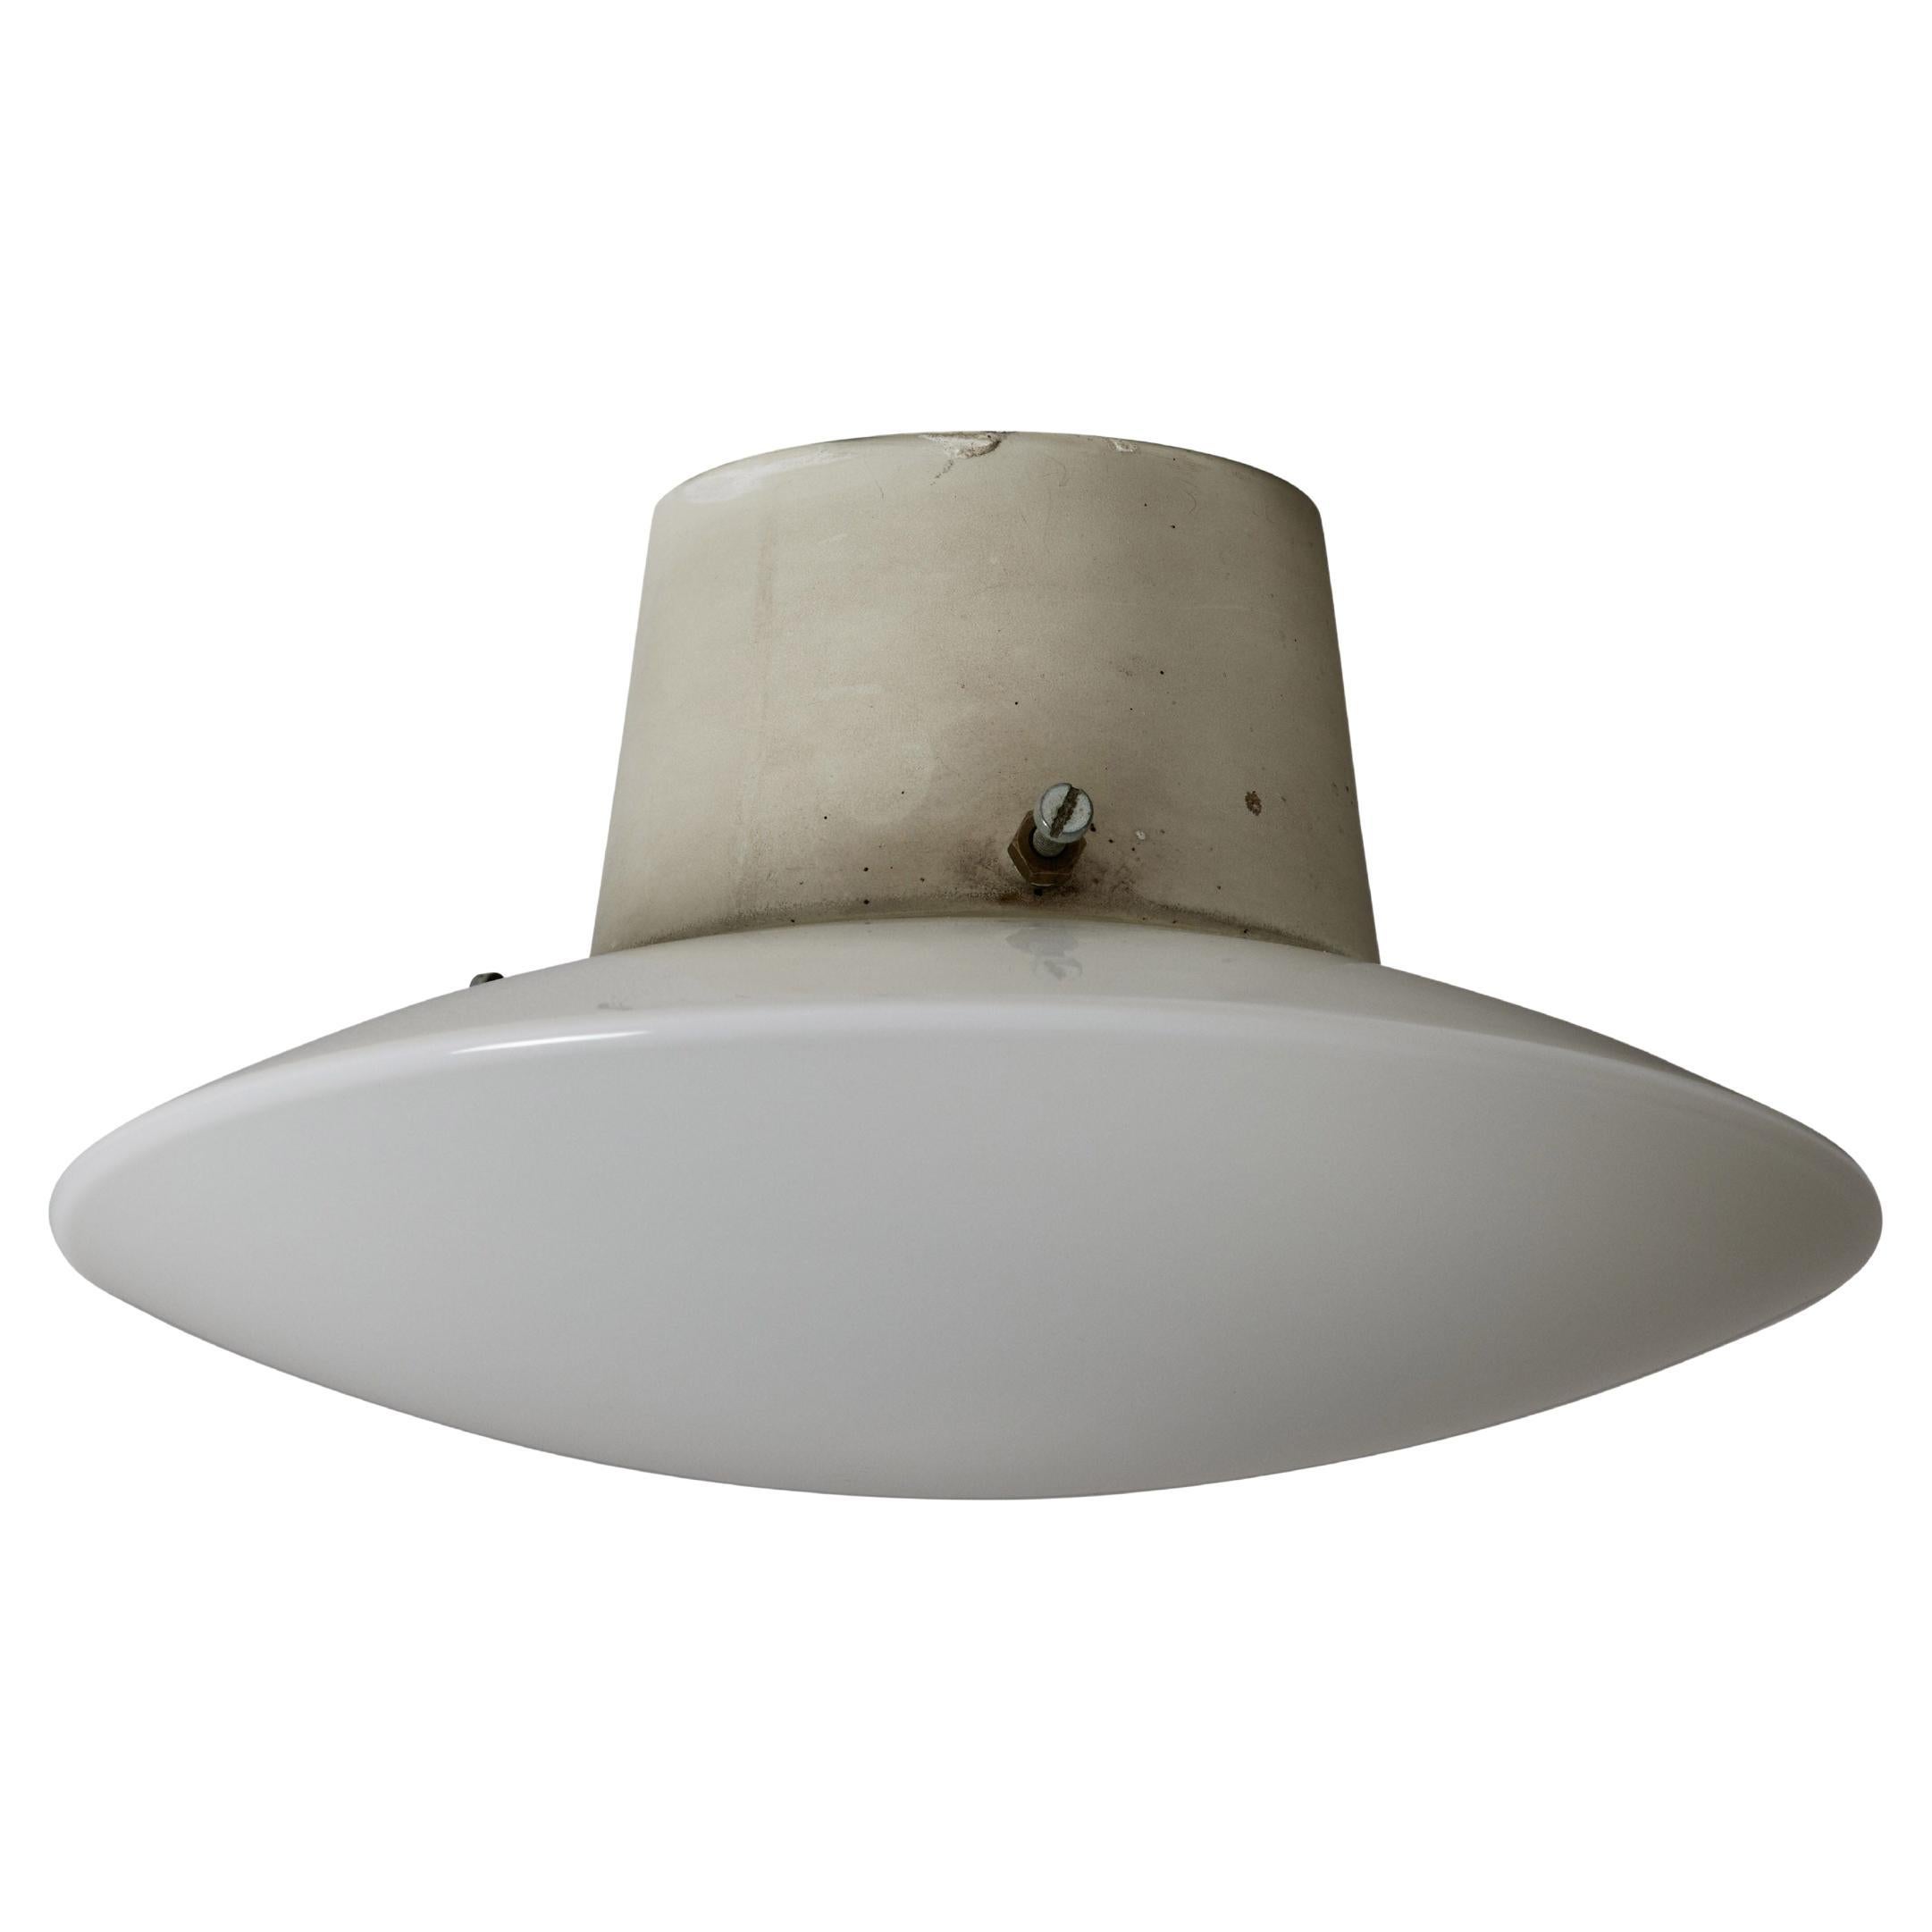 AJ Eklipta flush mount by Arne Jacobsen for Louis Poulsen. Designed and manufactured in the Netherlands, circa 1960's. Enameled metal, opaline glass diffuser. Wired for U.S. standards. This light holds a single E14 socket type, adapted for the US.